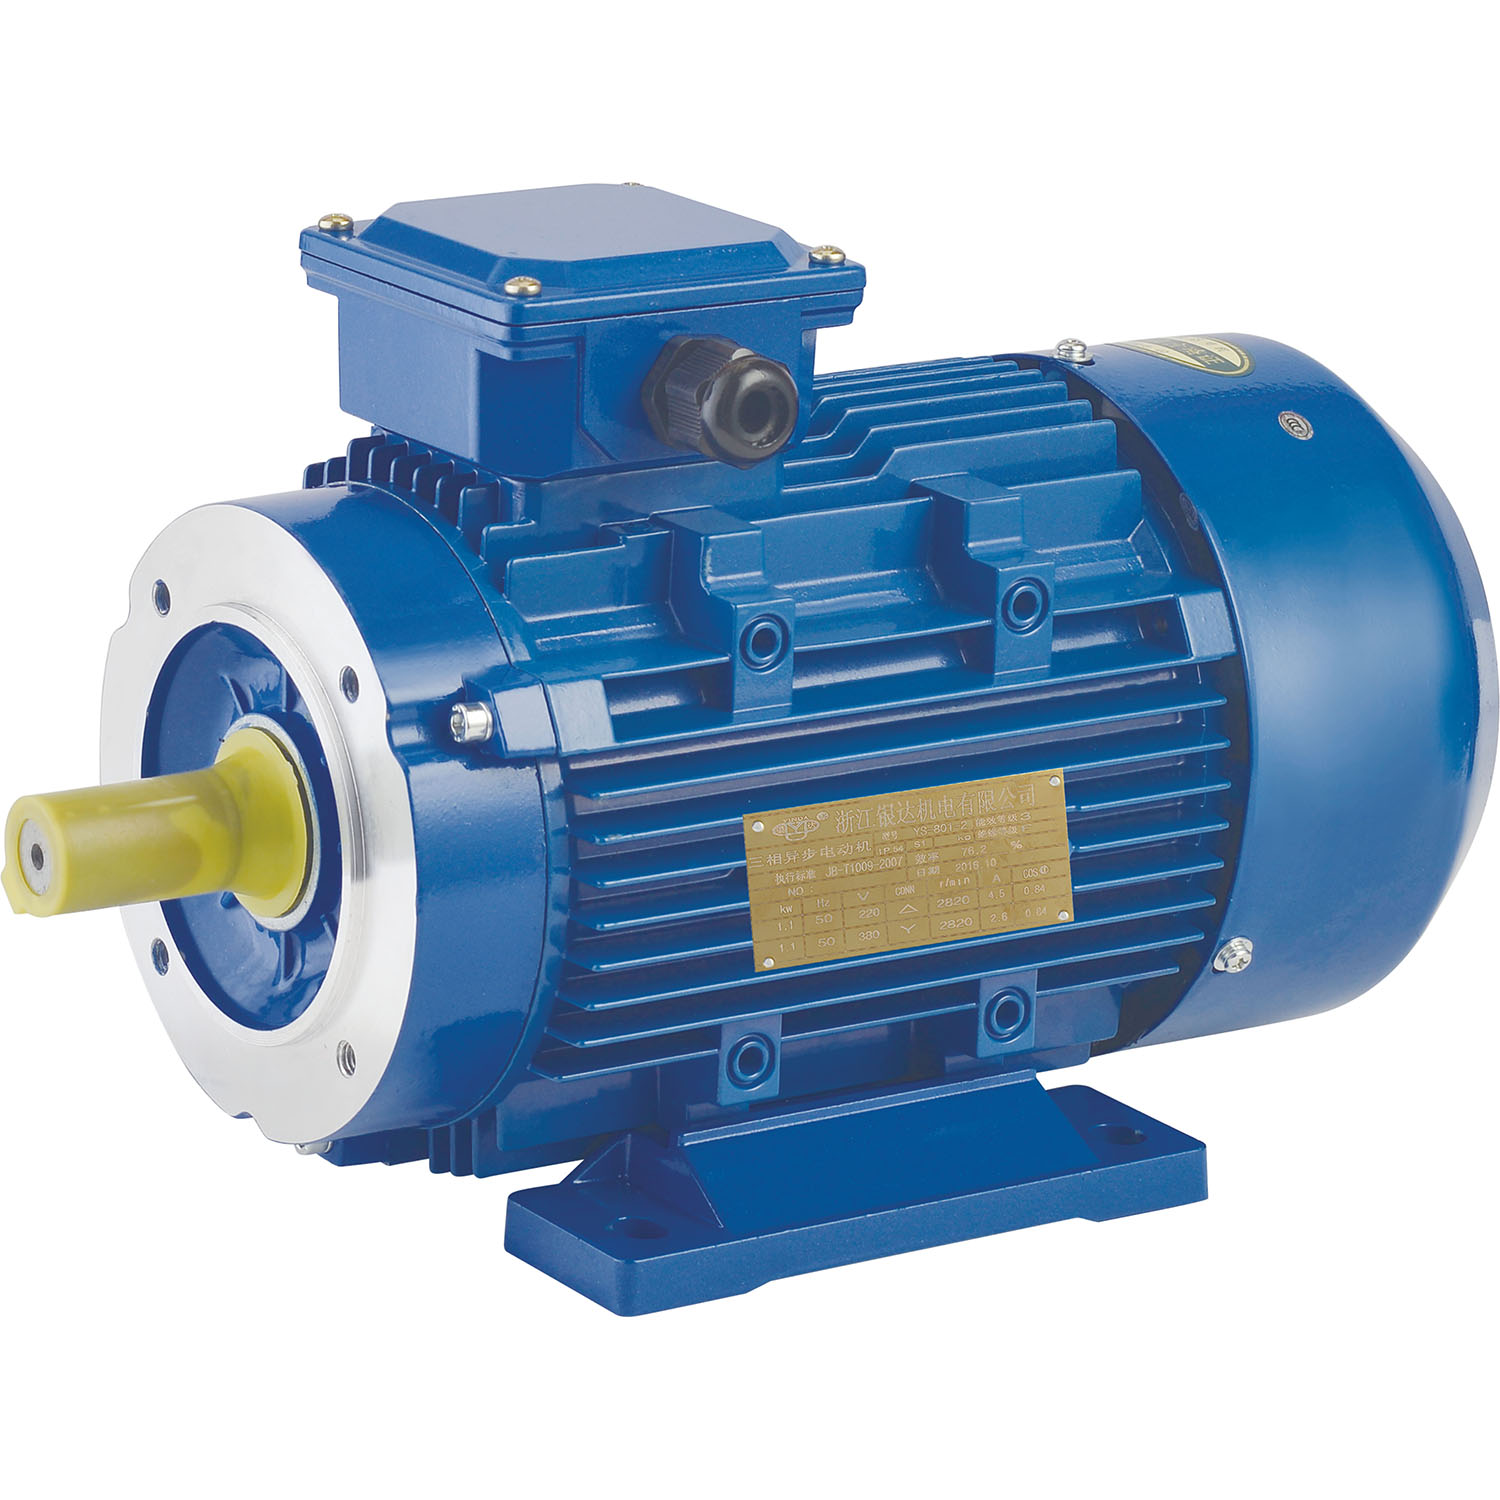 YX3-100L2-4 3.0KW 4.0HP aluminum cylinder series high efficiency three-phase asynchronous motor